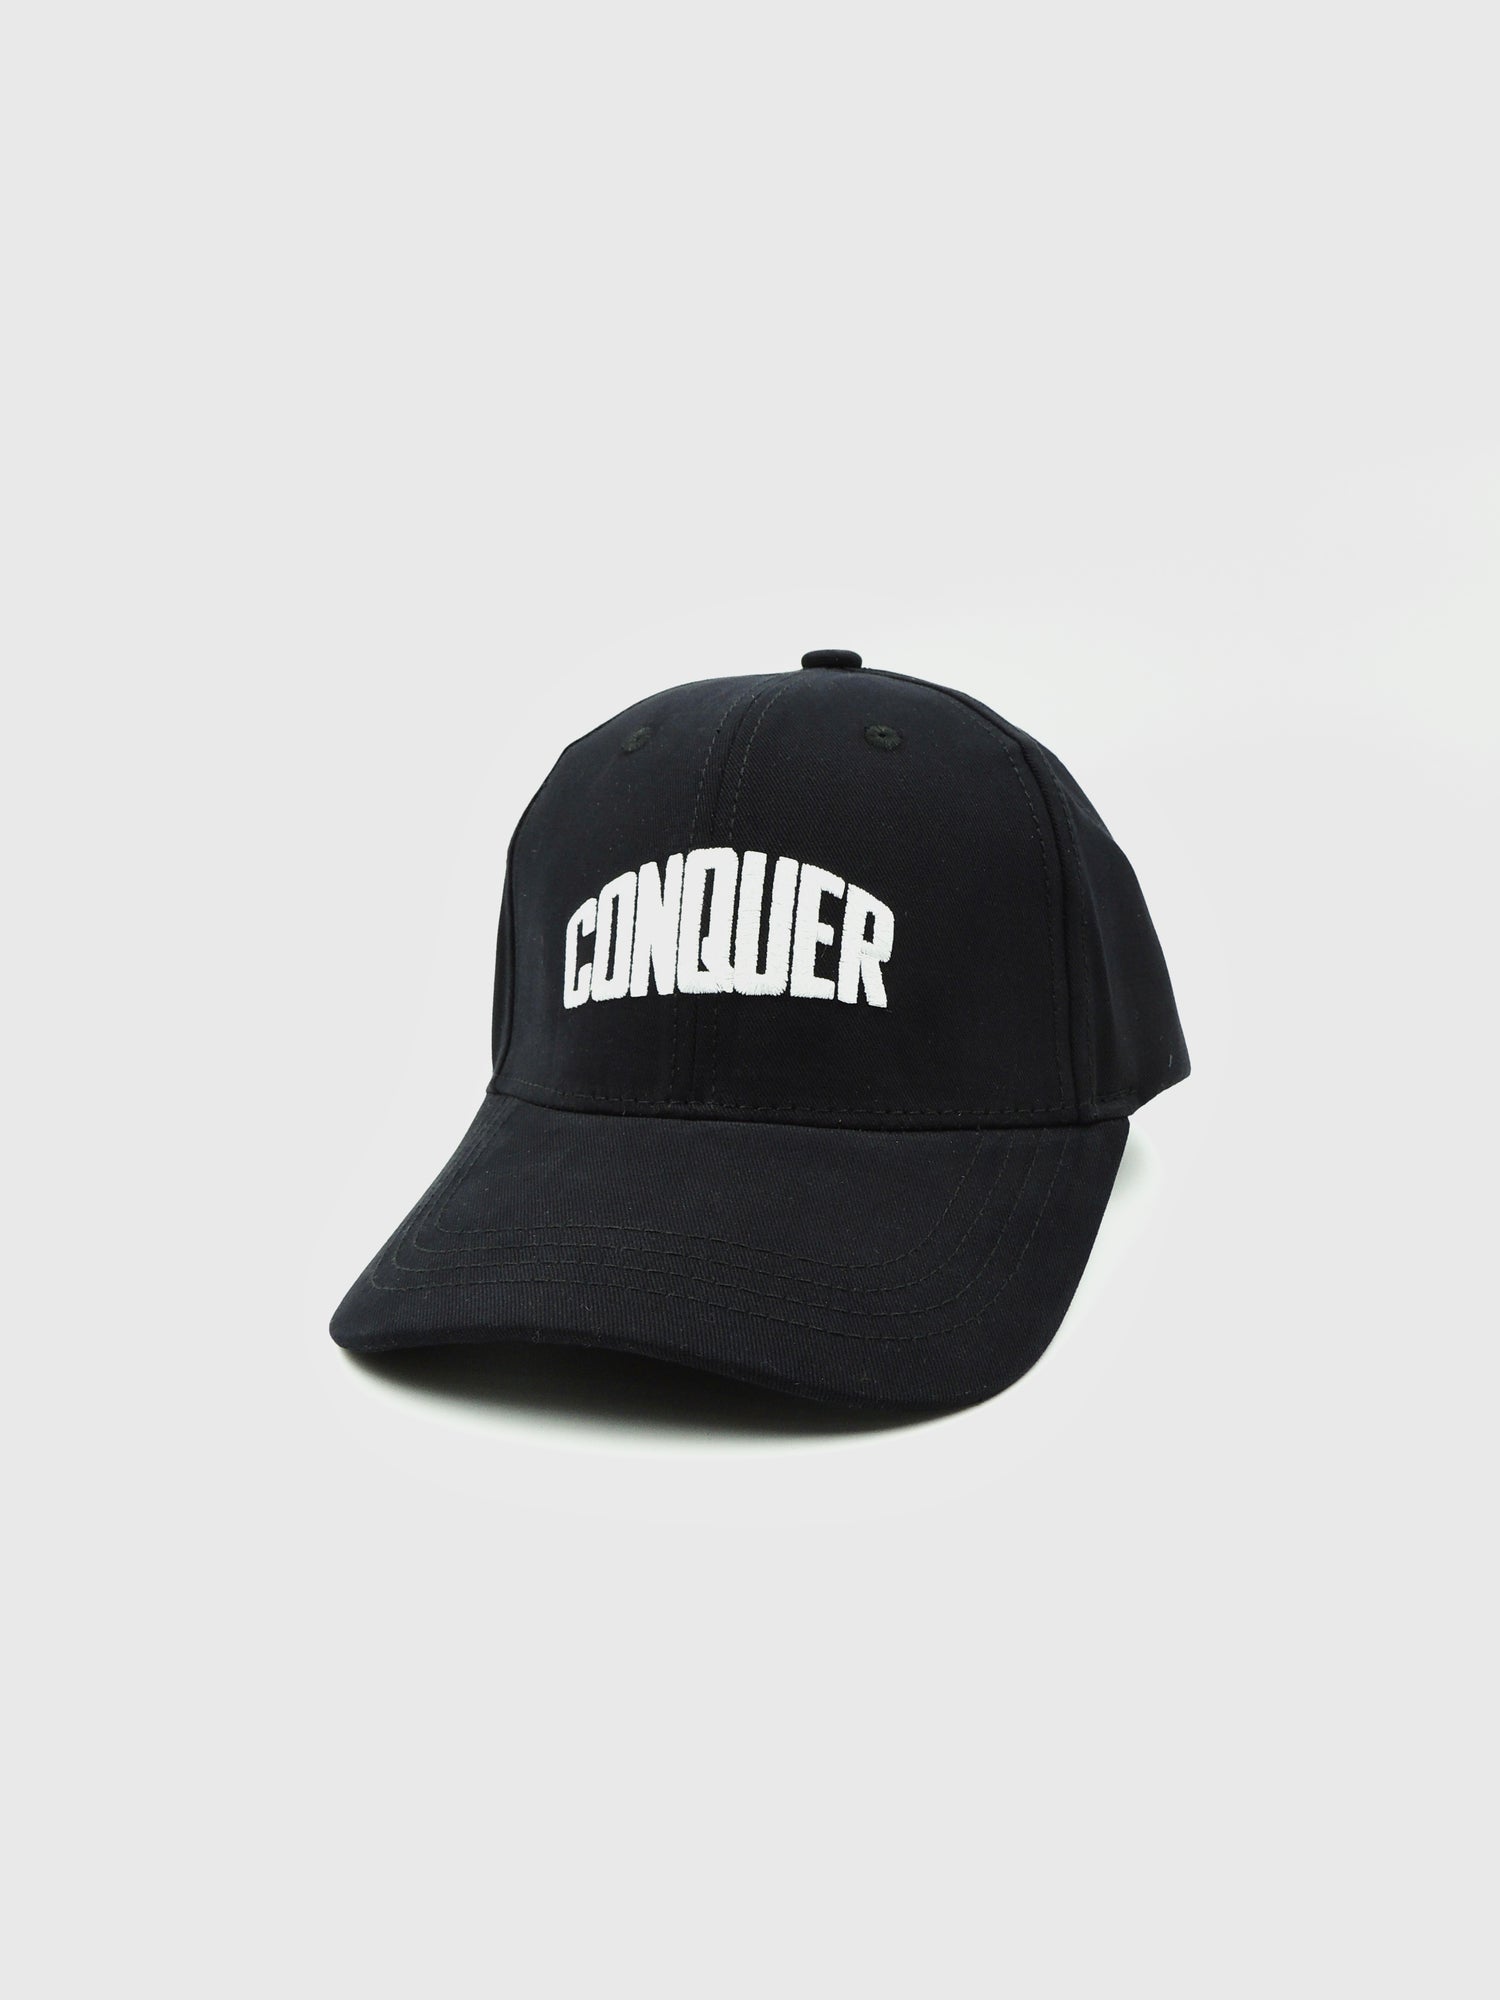 [keyword]-One Word StoreConquer Cap